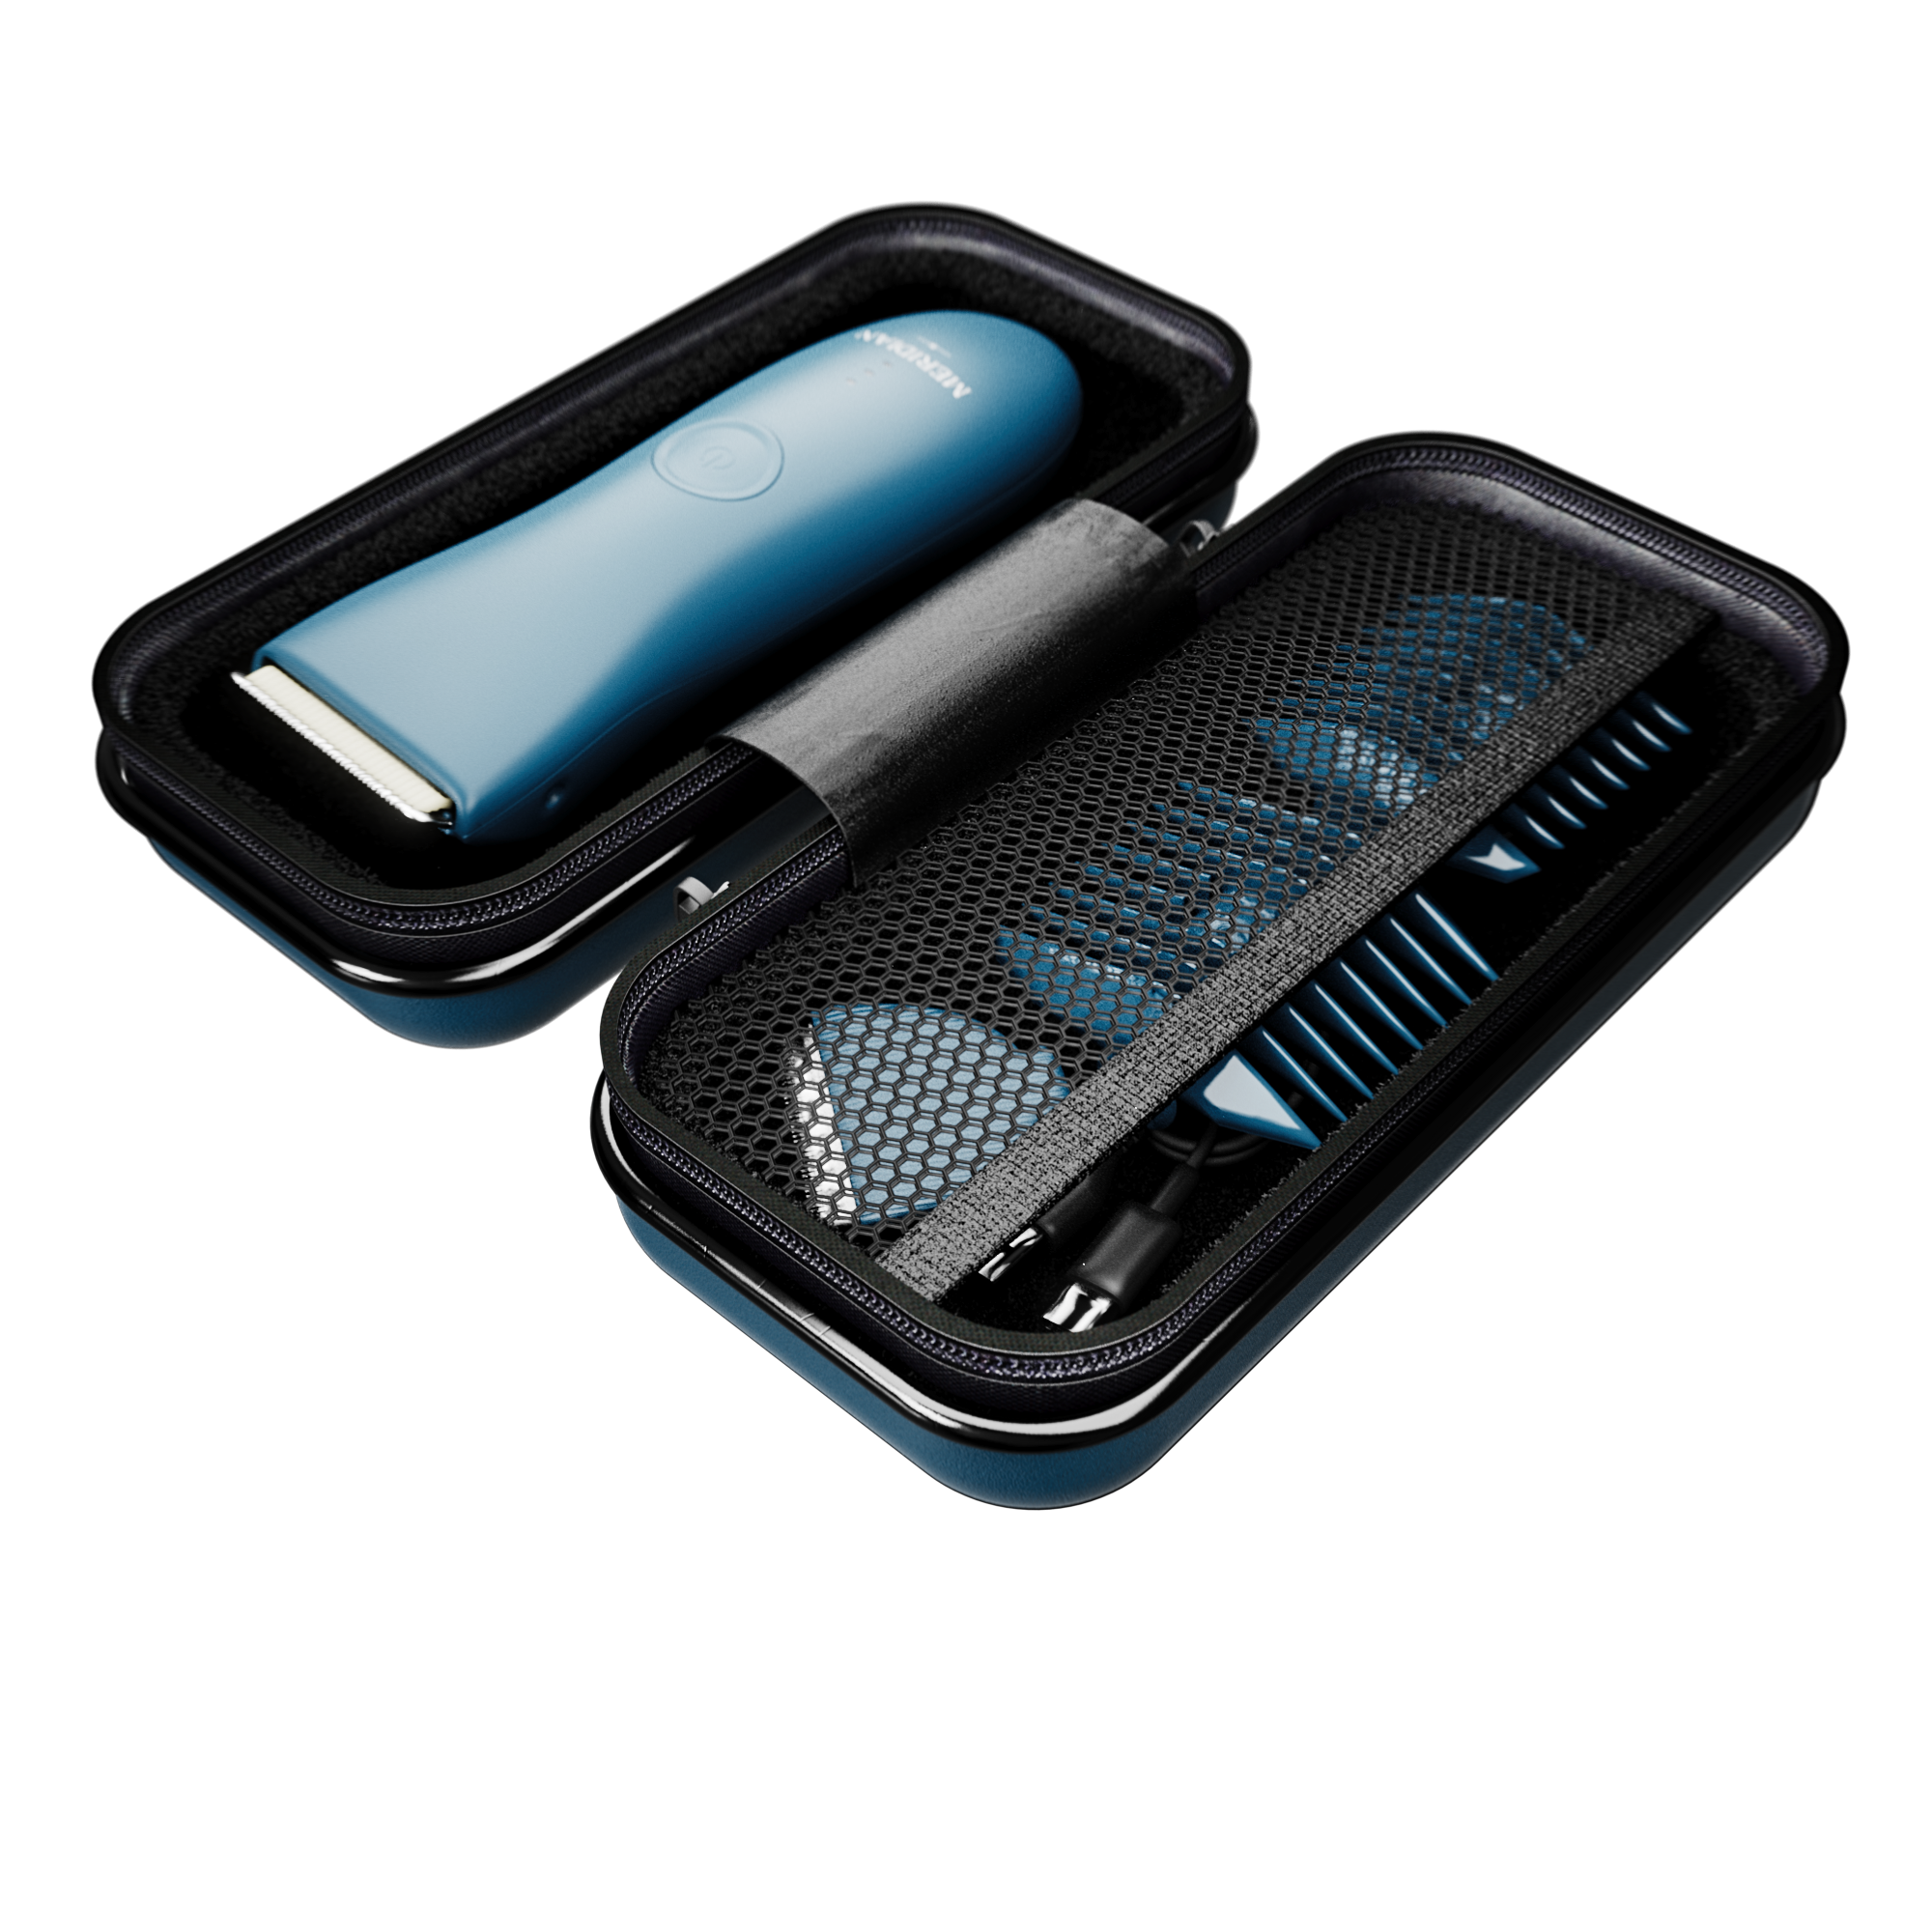 Travel case opened with the trimmer inside